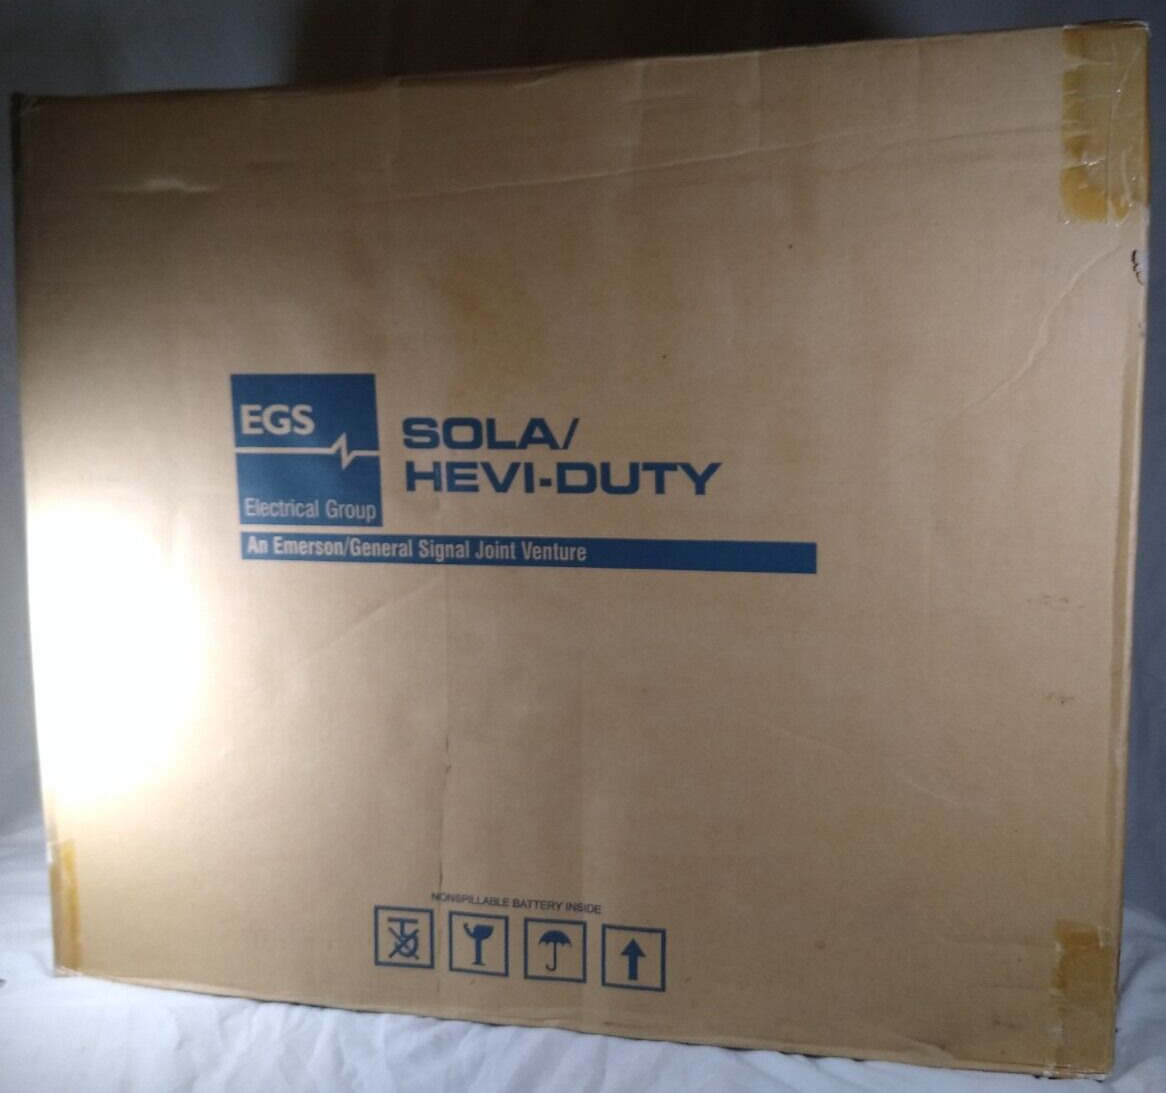 New Old Stock / Sola/Hevi-Duty series 4000 UPS 1496BAC For S42000TRM & S43000TRM